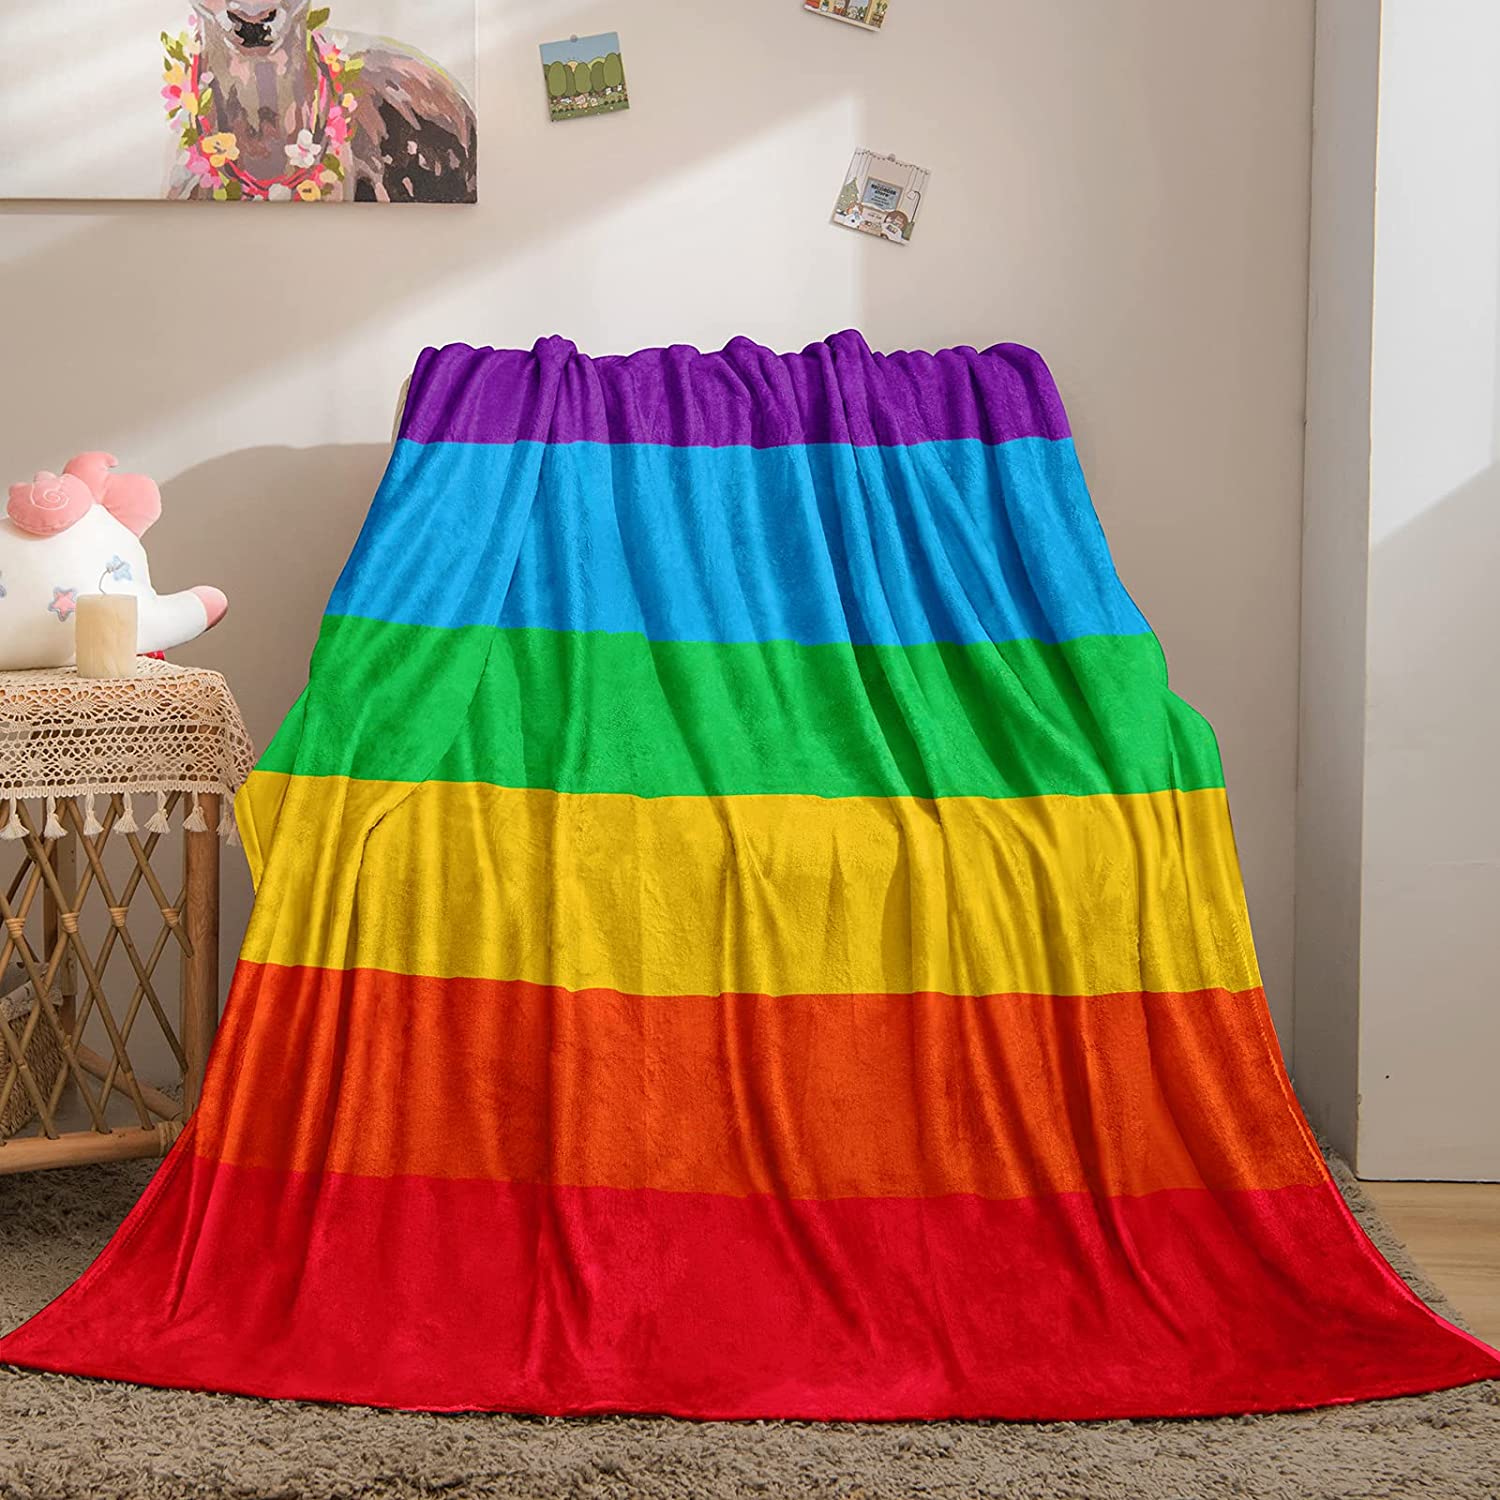 Soft Blanket Rainbow Blanket/ Throw Blanket For Couch Colorful Stripe Rainbow Printed Soft Blanket For Lgbt